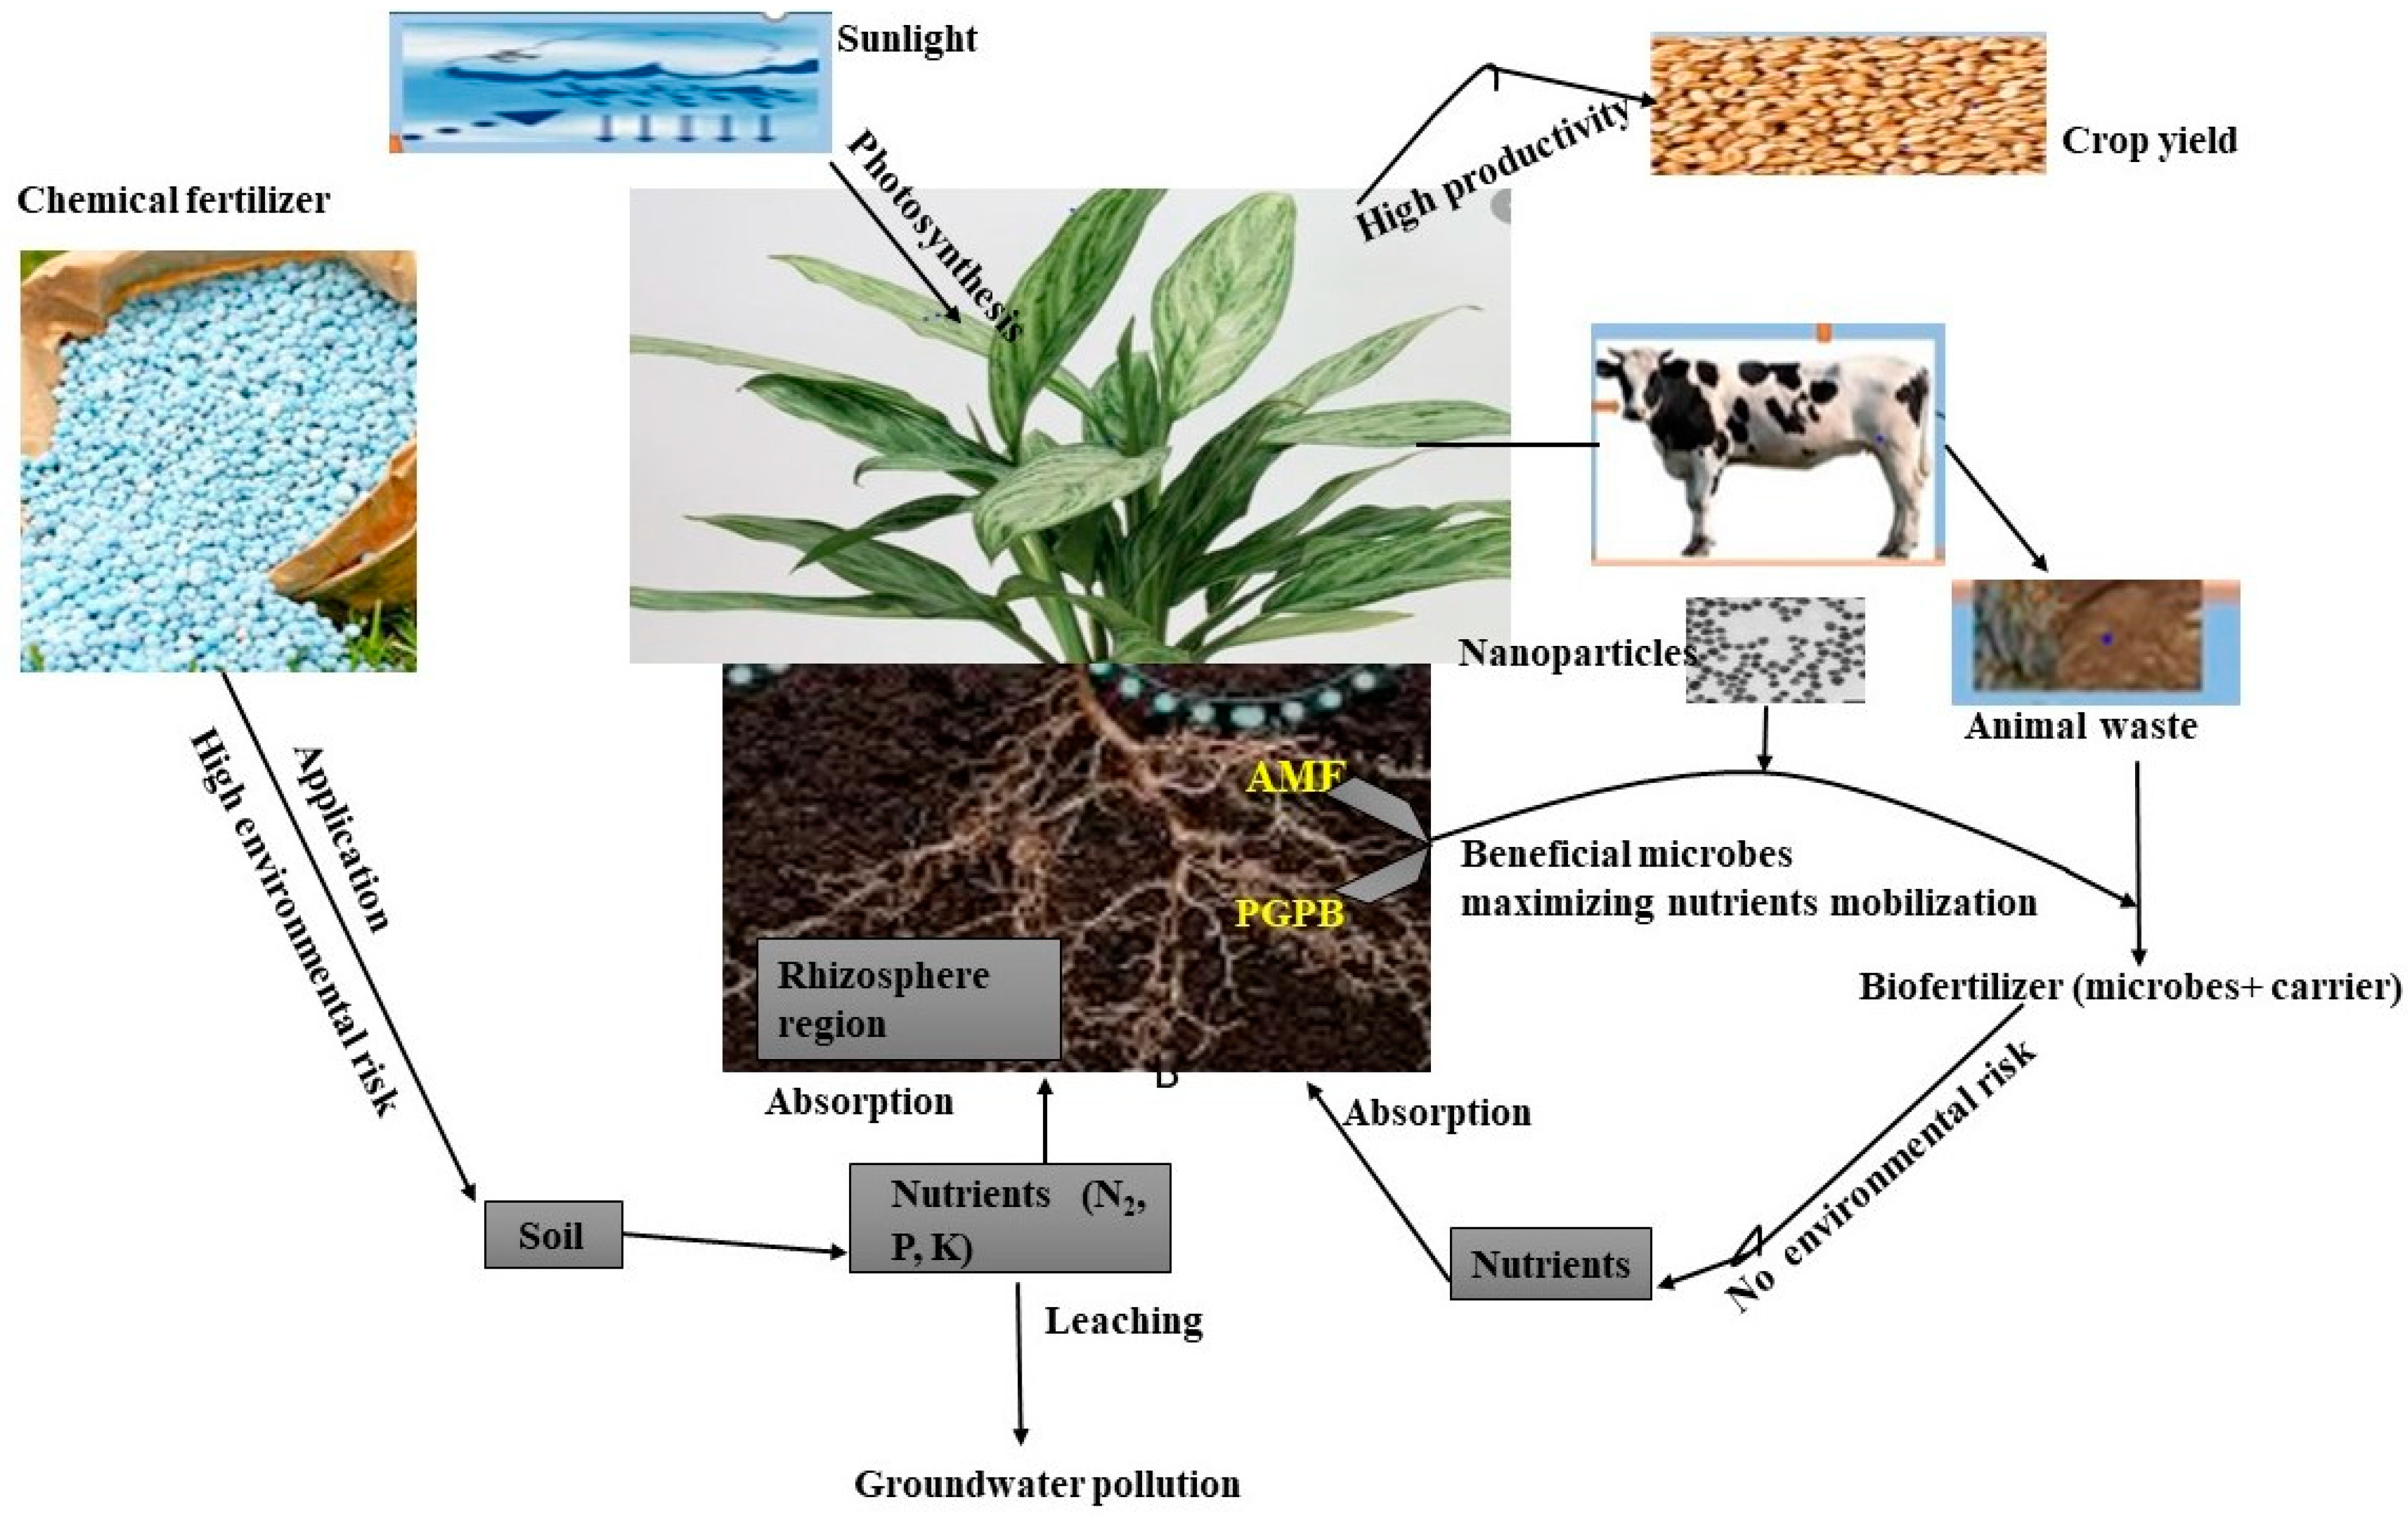 IV. Benefits of Using Soil Microorganisms as Biofertilizers